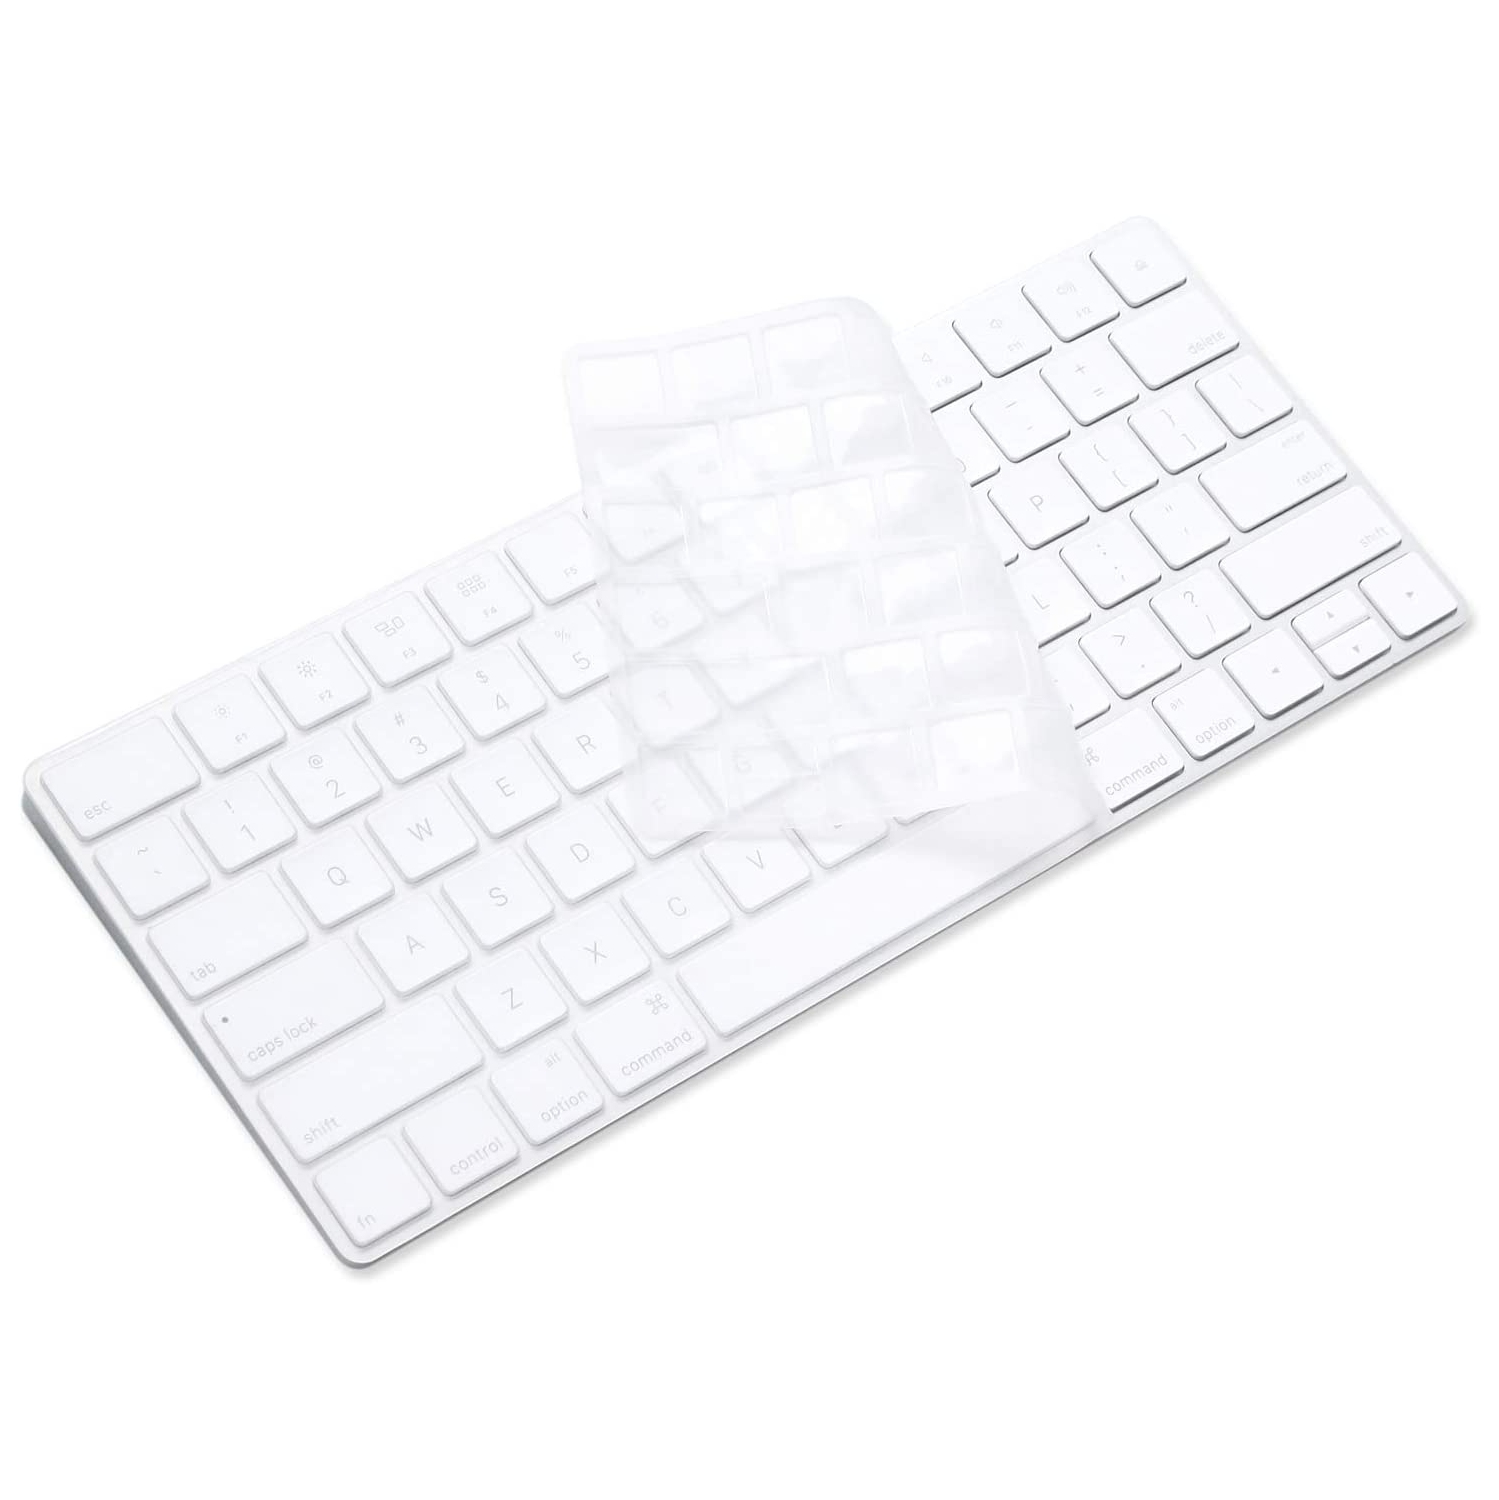 Keyboard Protector Cover Skin for Apple Magic Keyboard & Magic Keyboard 2 (WITHOUT Numeric Keypad, U.S Version, Model: MLA22L/A--A1644) Ultra Thin Silicone Protector (Tran